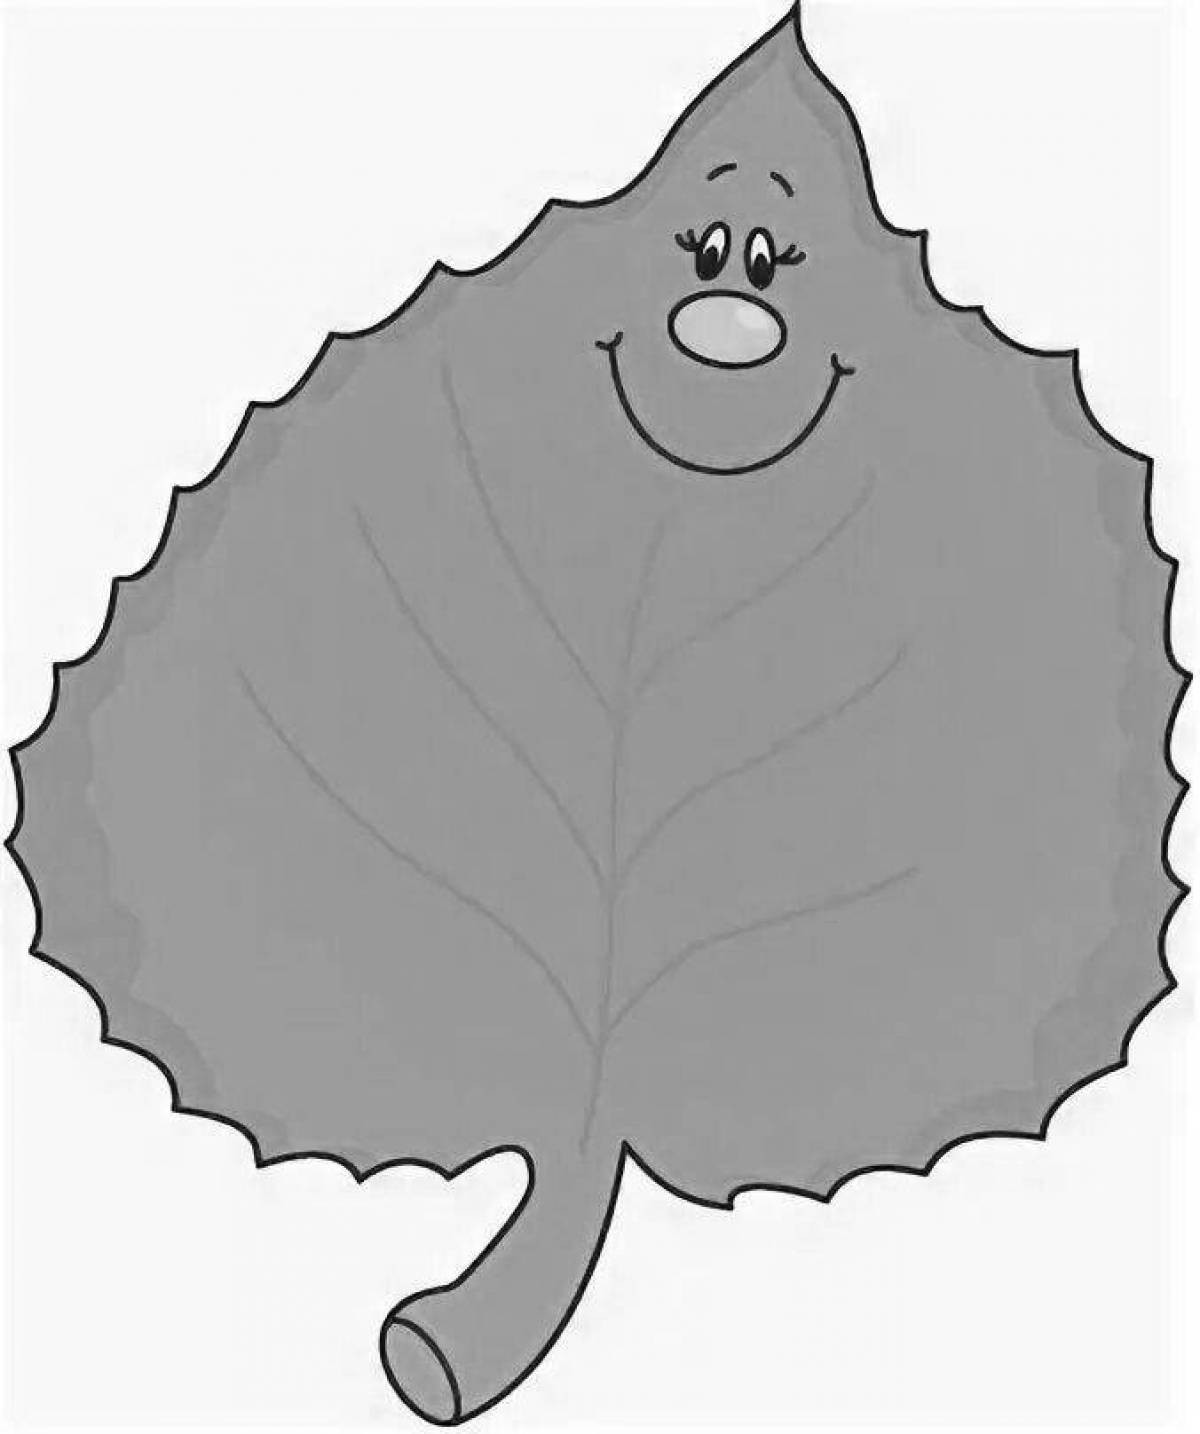 Adorable autumn leaf coloring with smiley pattern